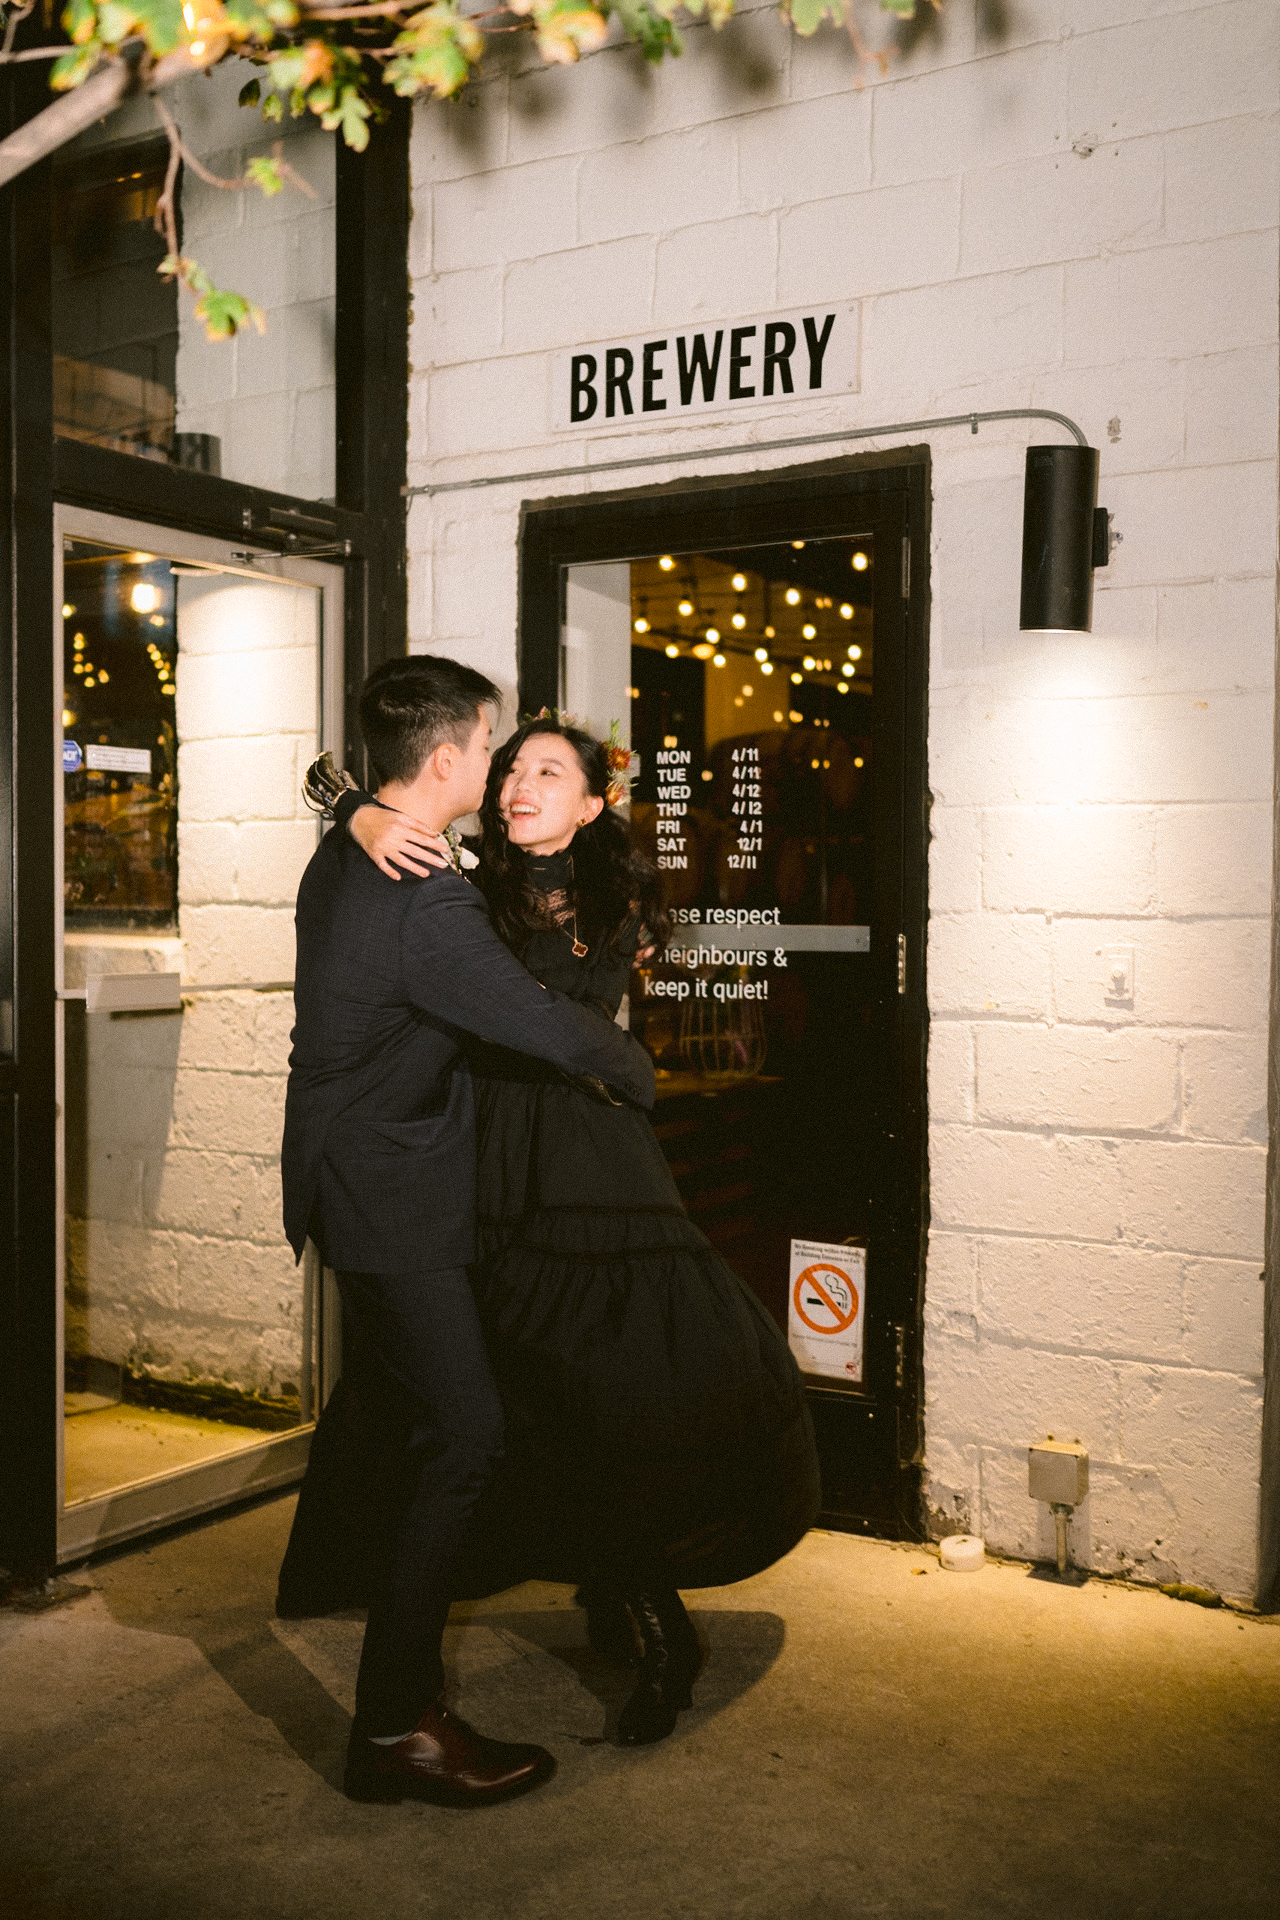 A couple sharing a romantic embrace outside a brewery at night.